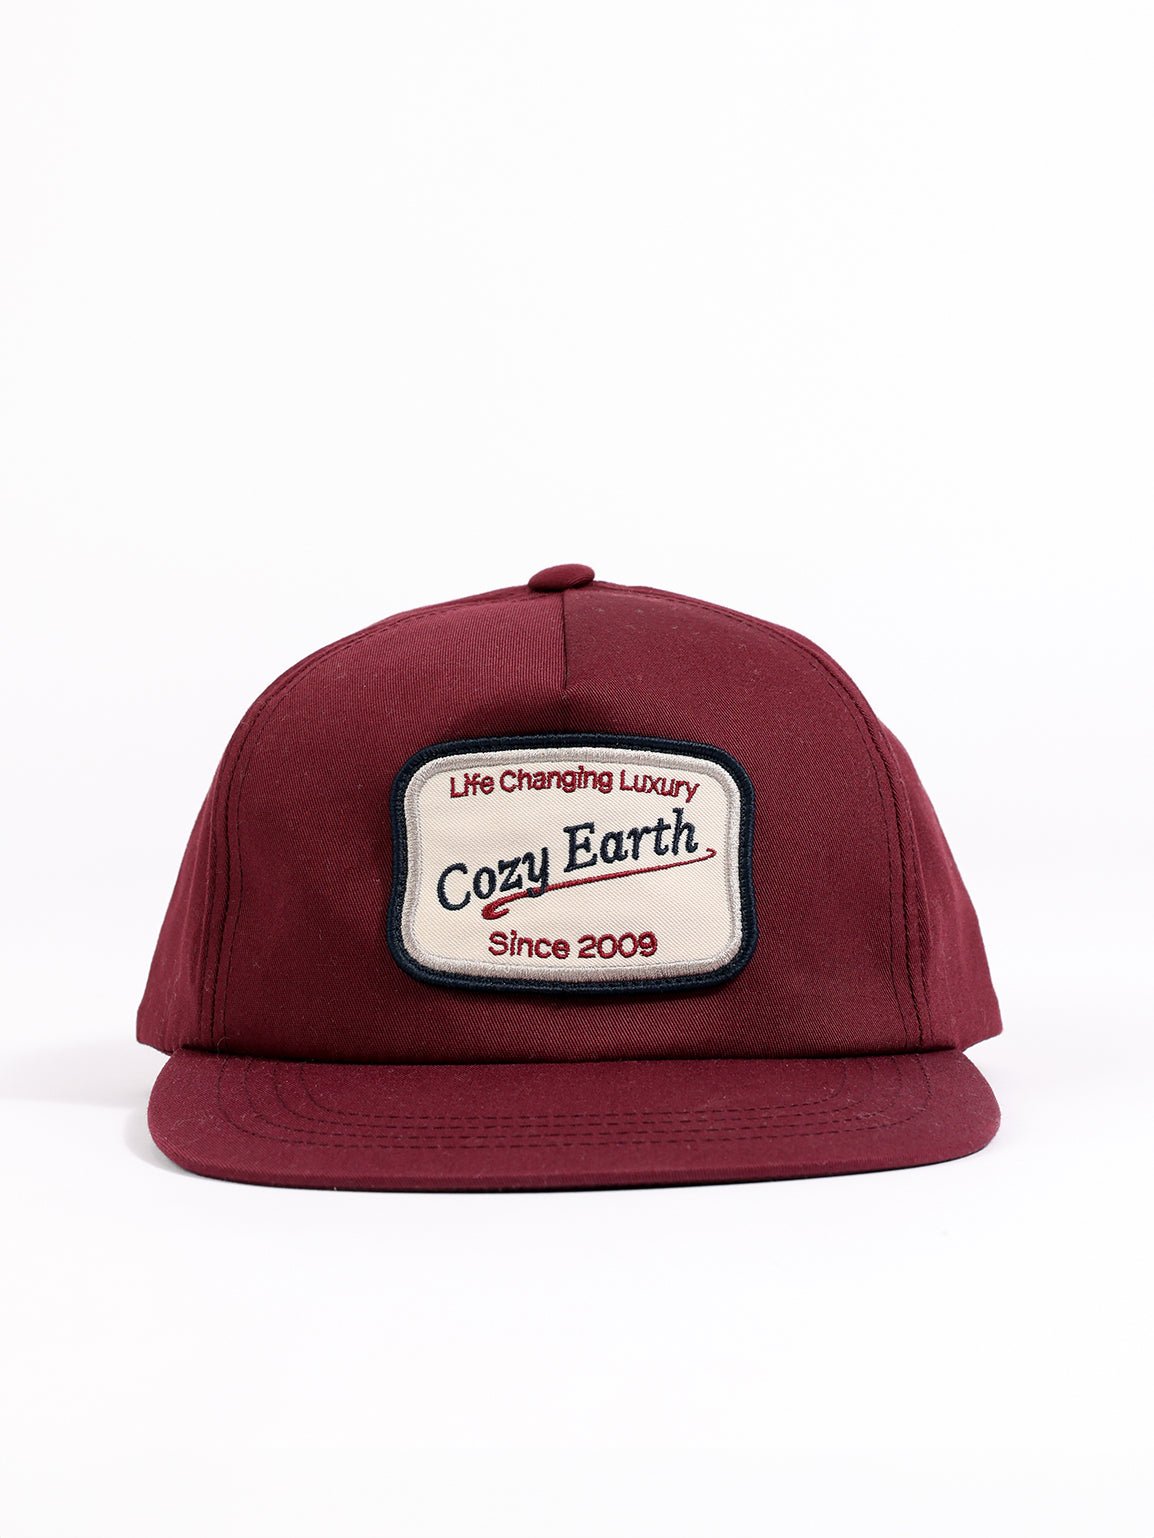 Maroon heritage snapback with white background |Color:Maroon